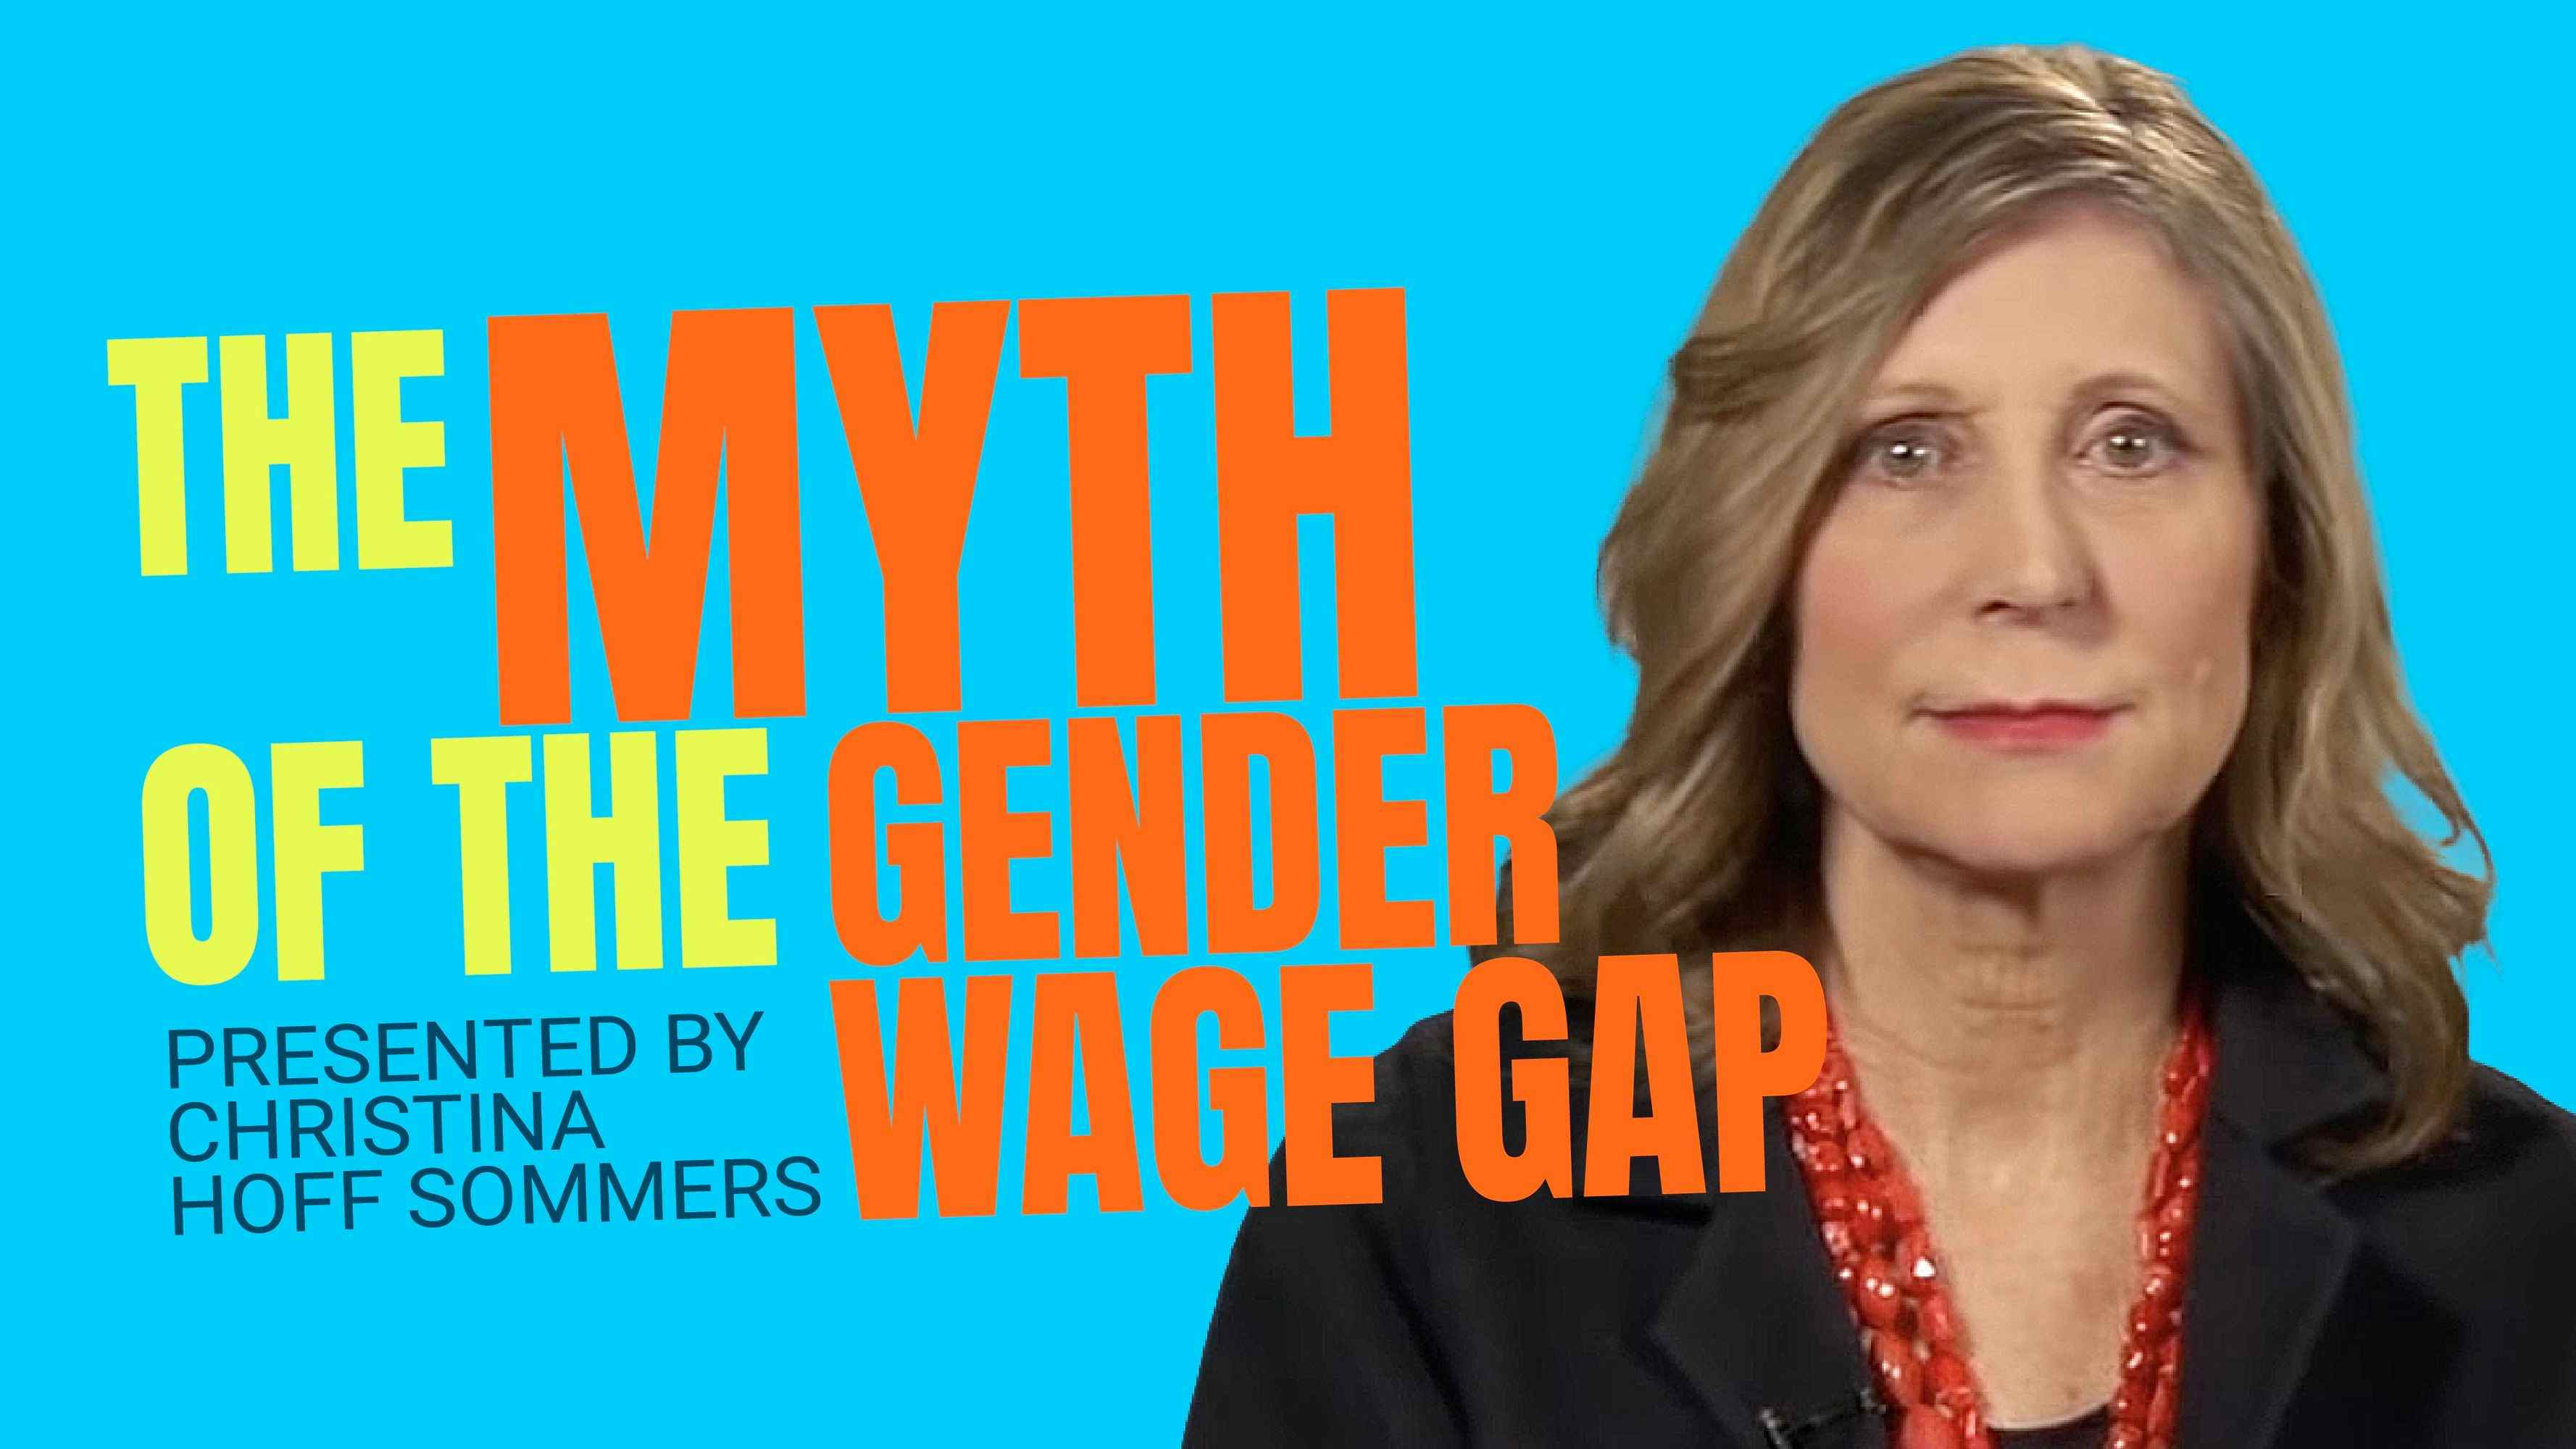 The Myth of the Gender Wage Gap